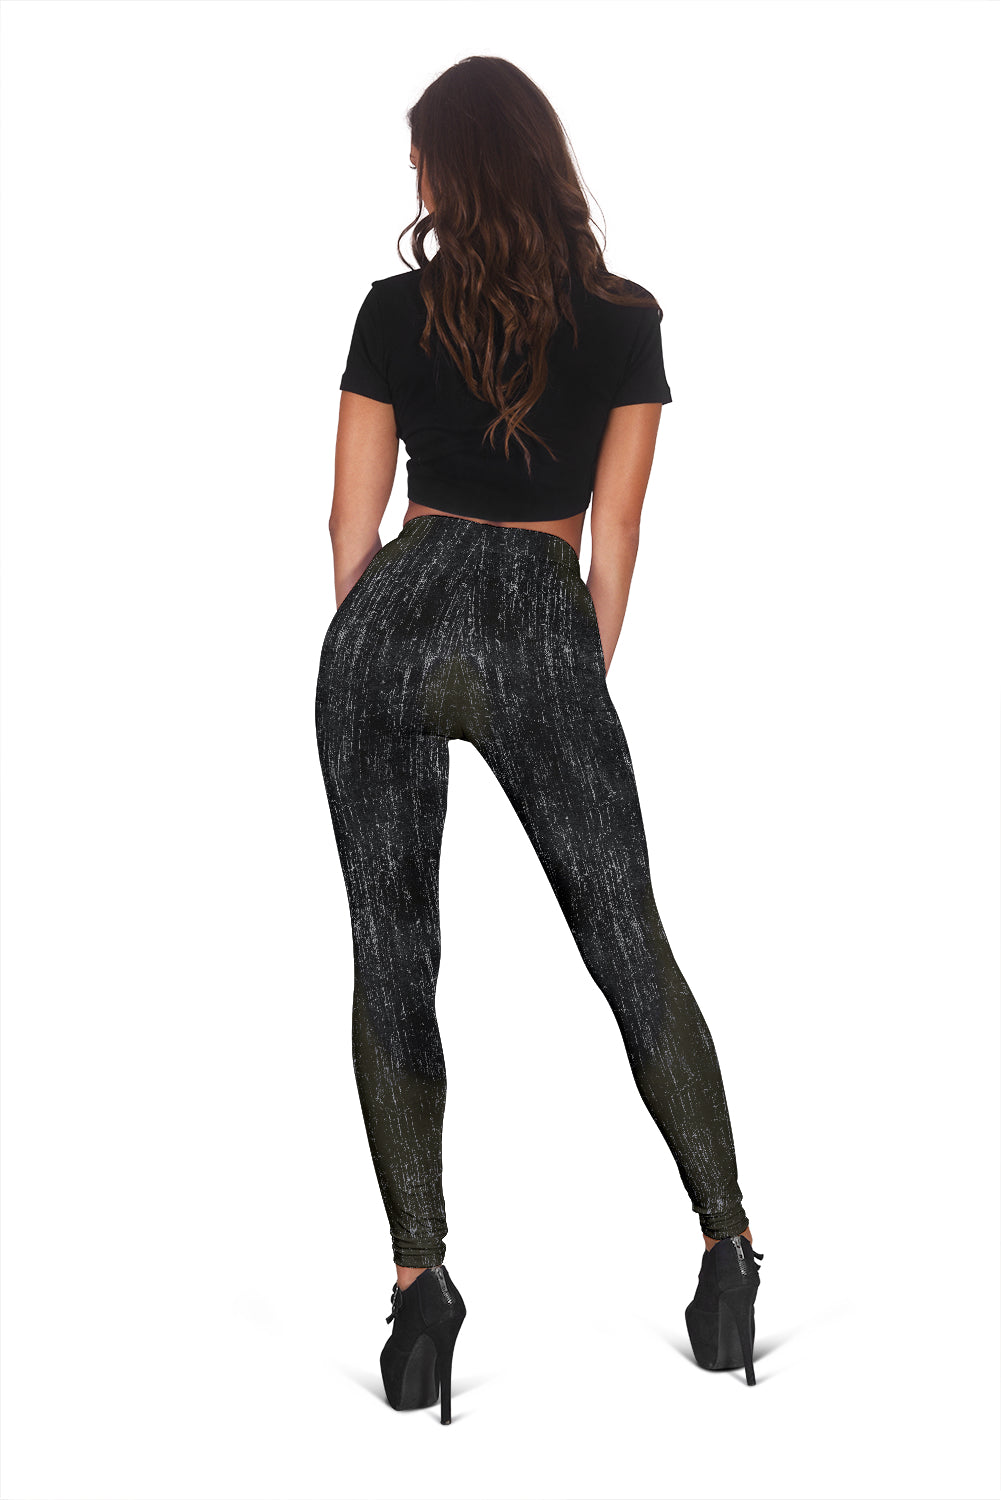 Distressed Camo Leggings With Grunge Camouflage